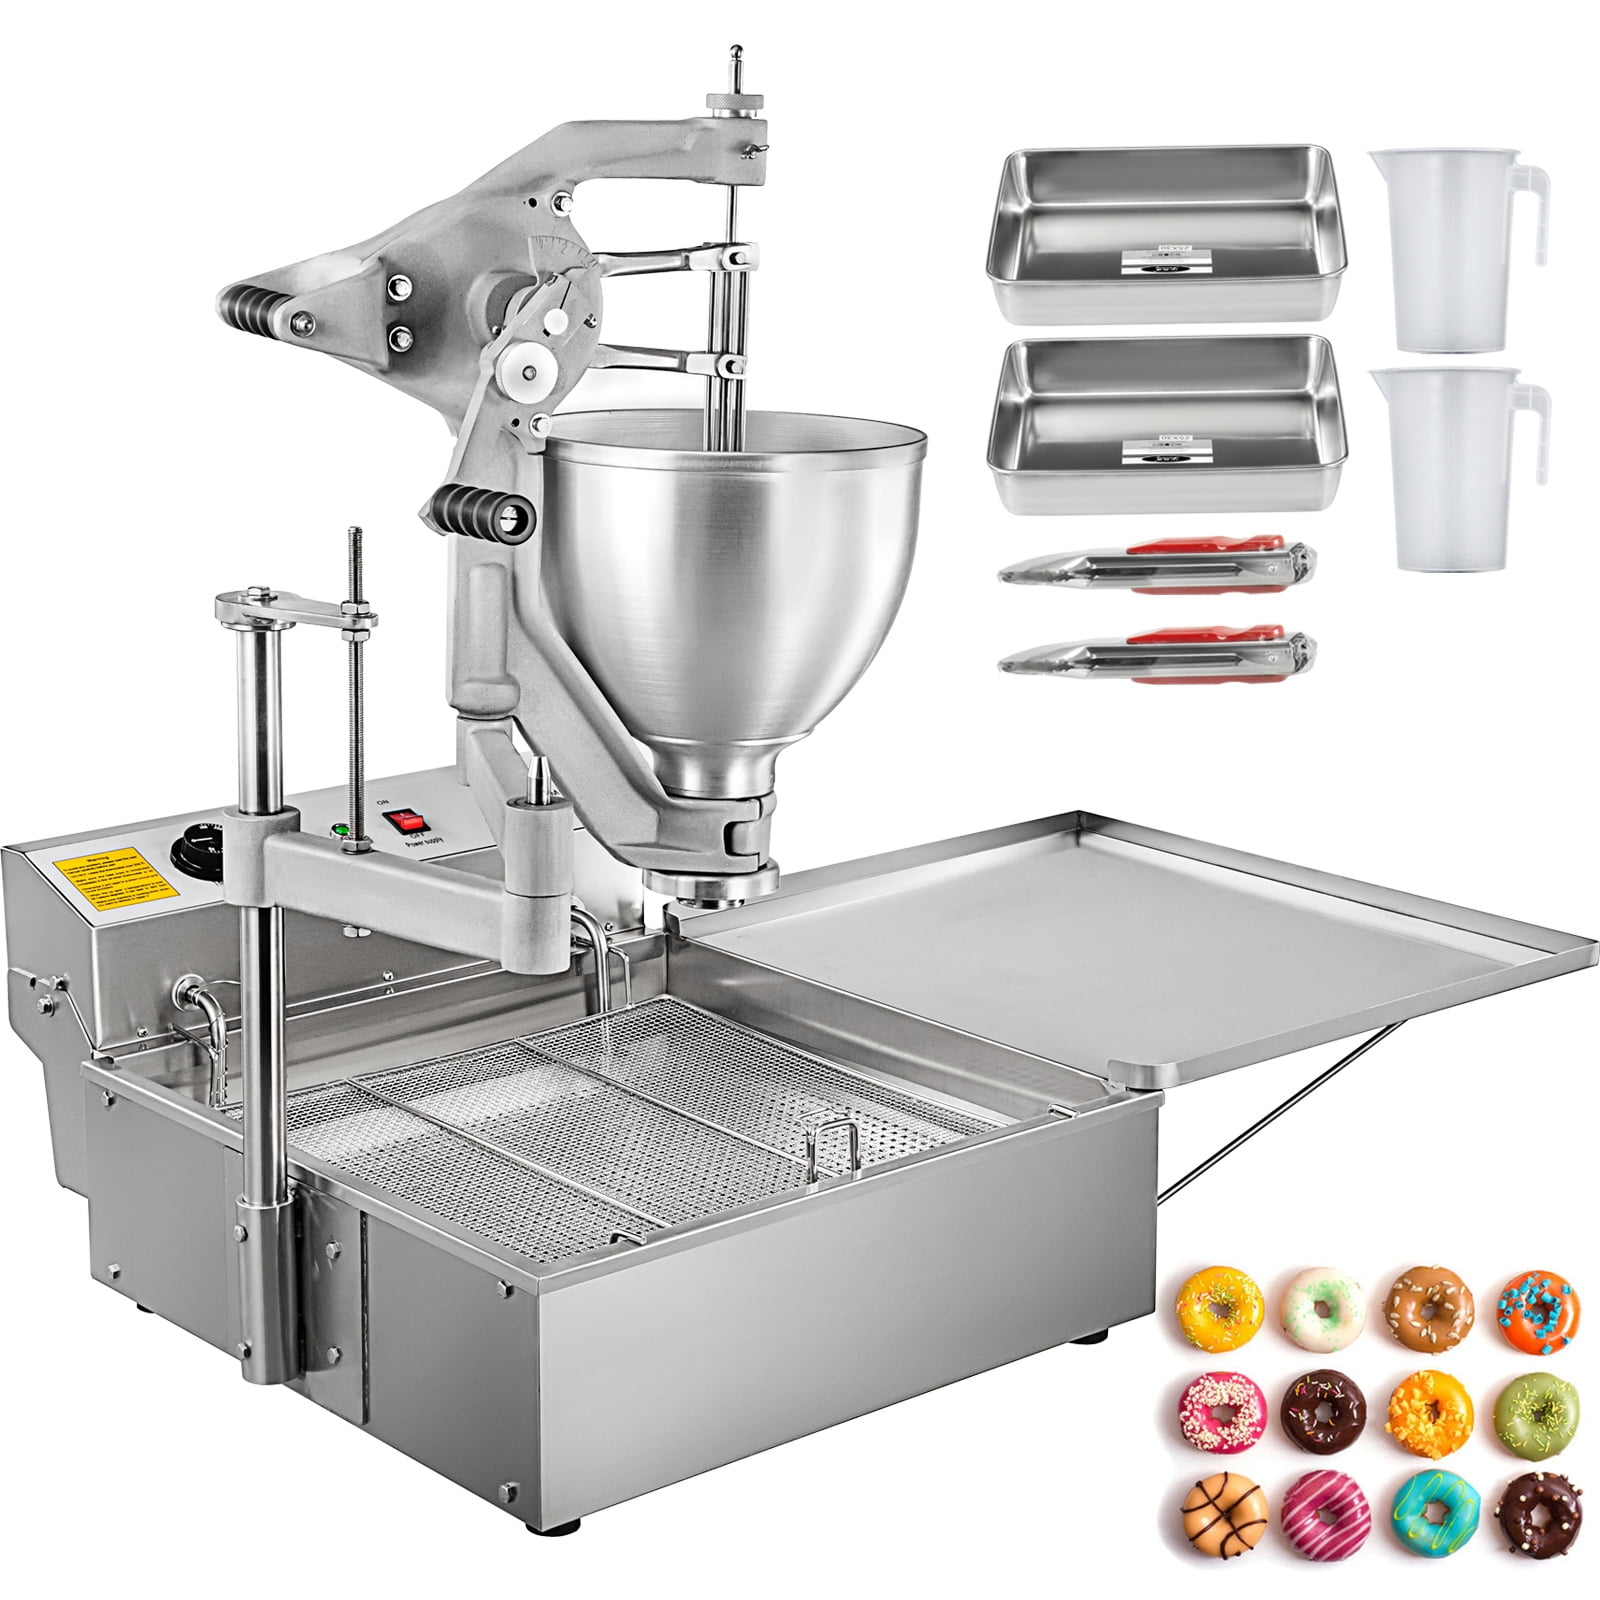  Koalalko Commercial semi automatic mochi/ring/ball different  mold Donut Machine, Donuts Making Machine adjustable thickness,Donut fryer  3000w,9L hopper,large capacity,for bakery, food cart: Home & Kitchen